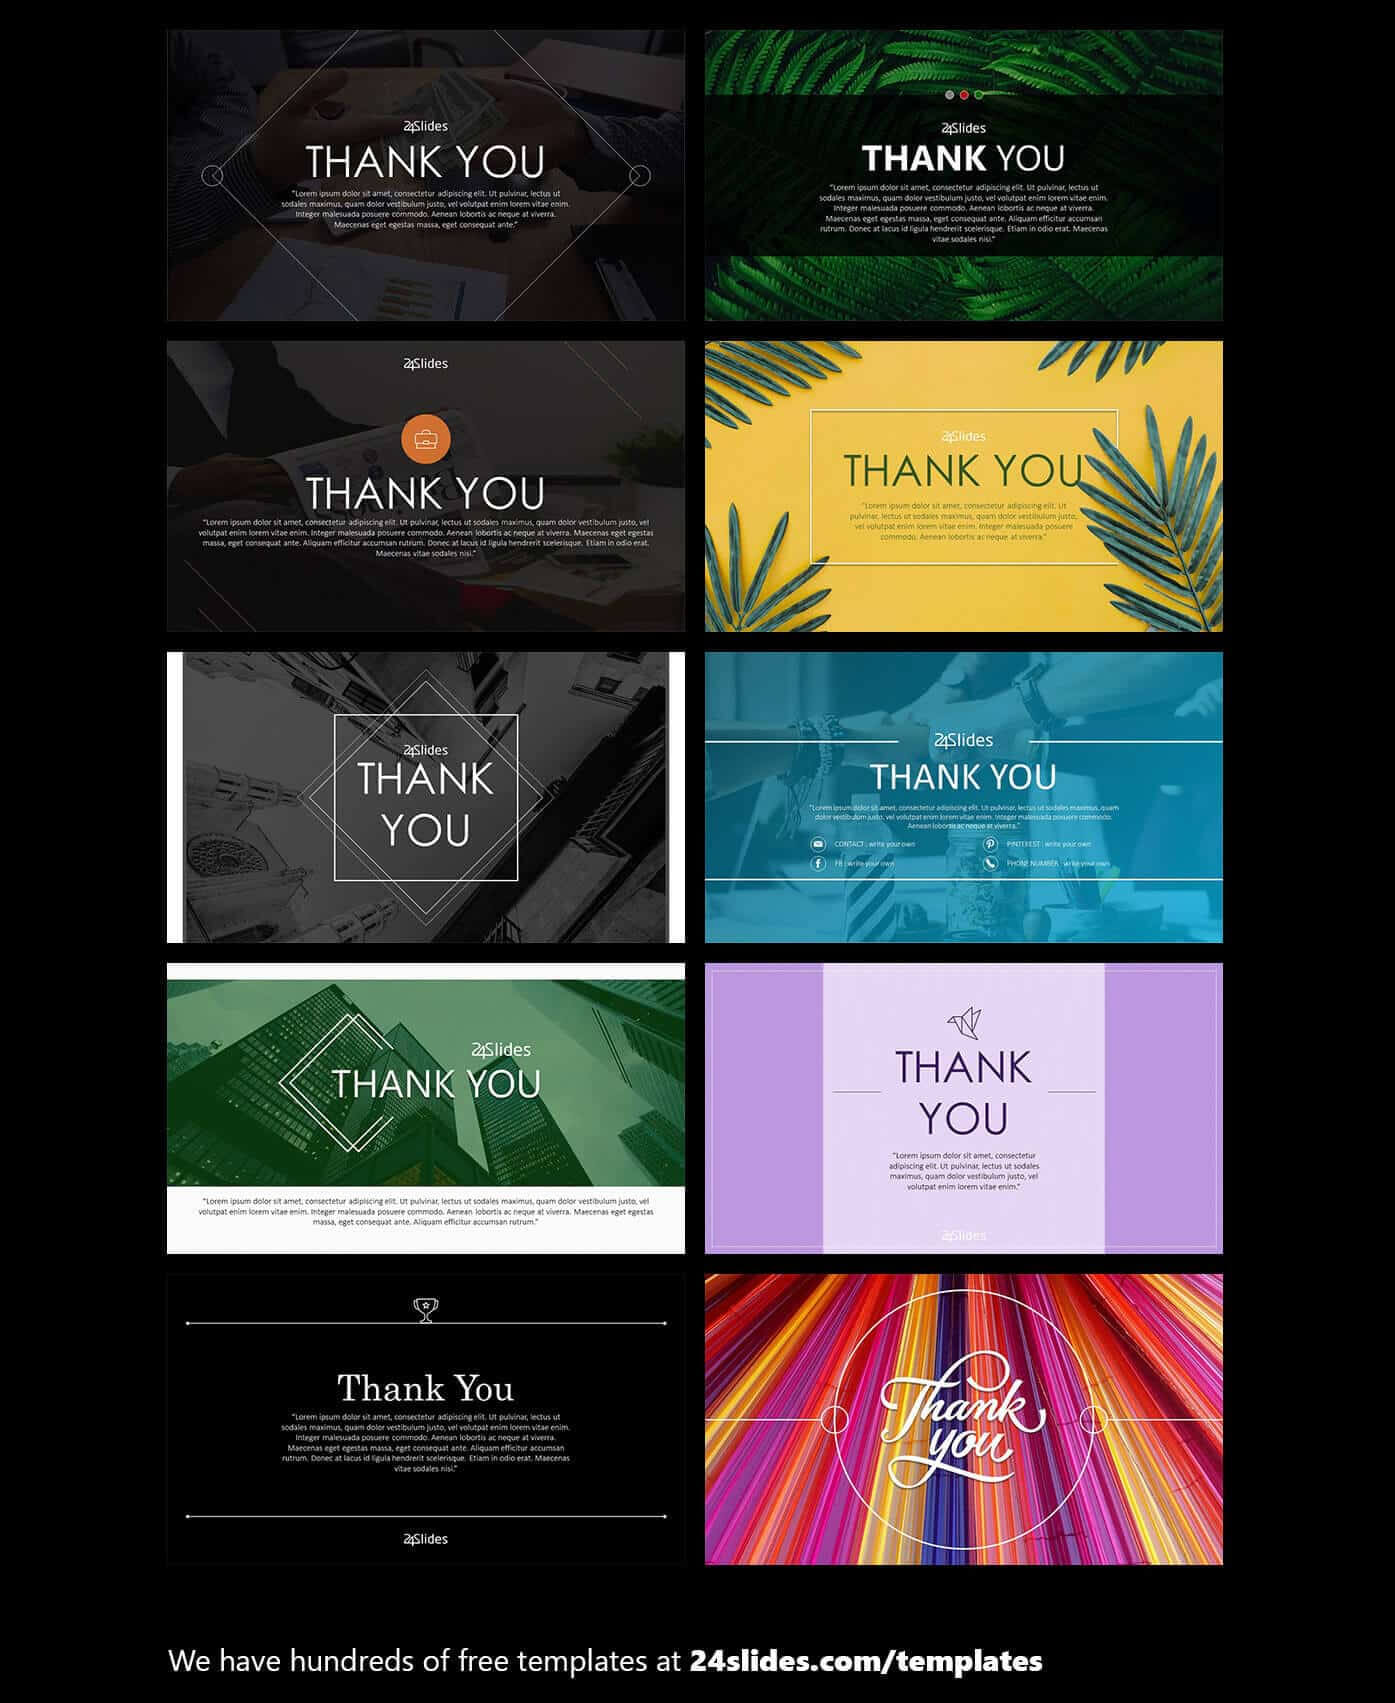 15 Fun And Colorful Free Powerpoint Templates | Present Better Throughout Fun Powerpoint Templates Free Download